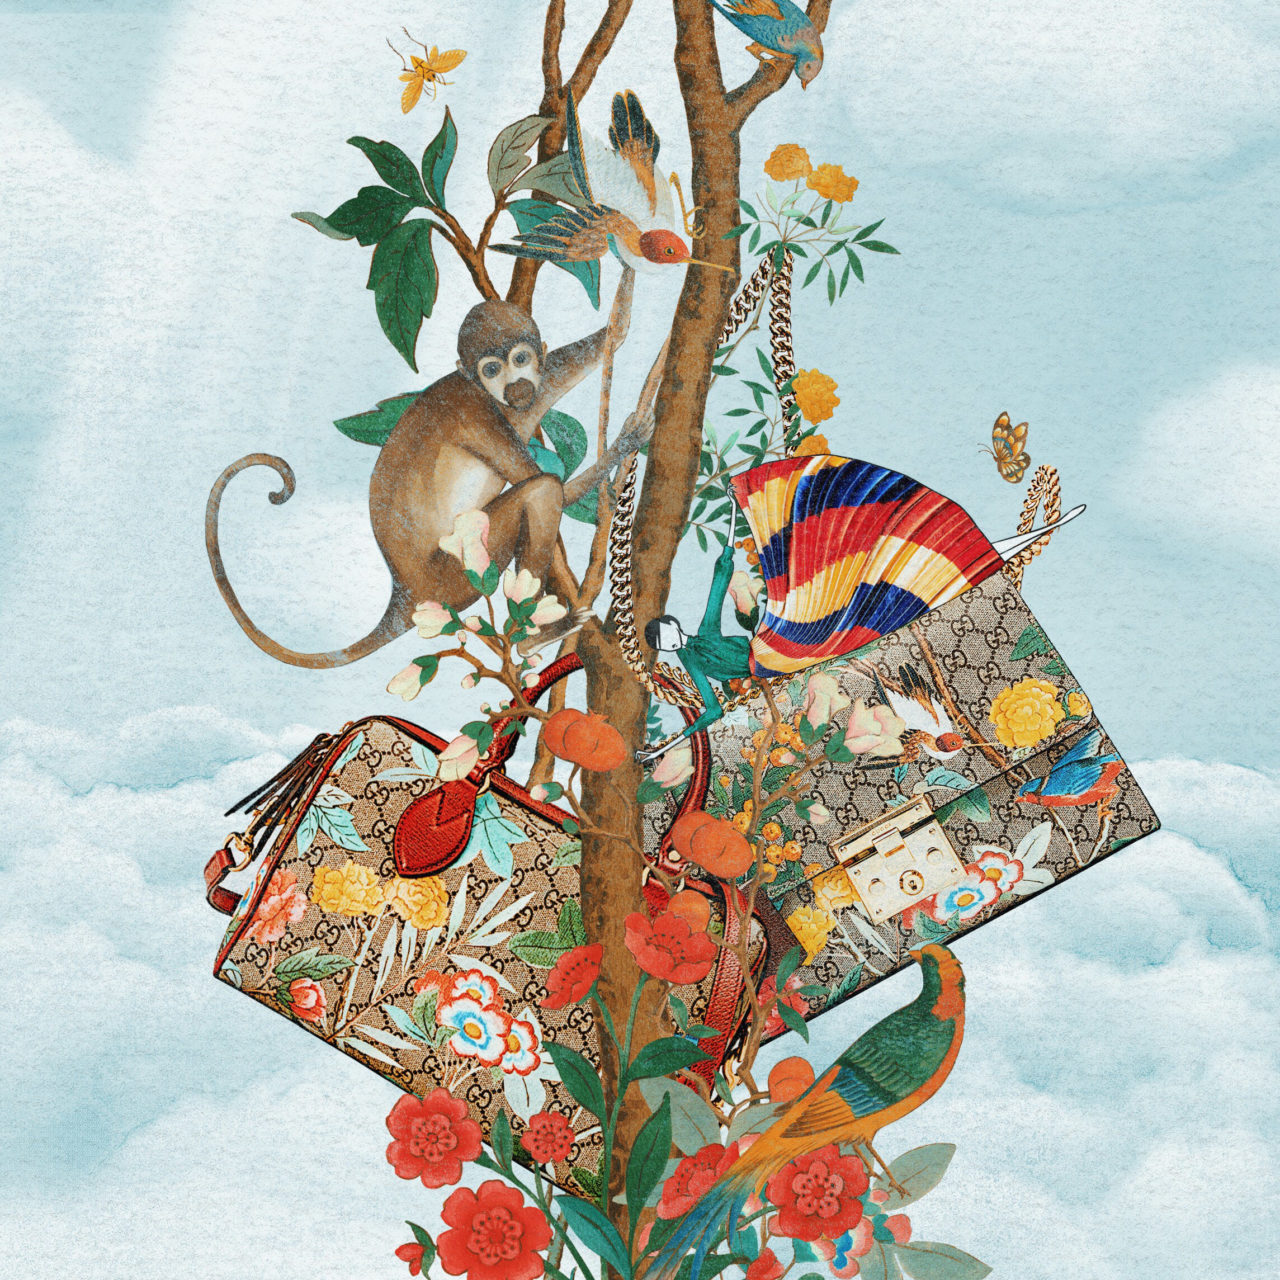 The Gucci Tian print inspired by eighteenth-century Chinese landscapes